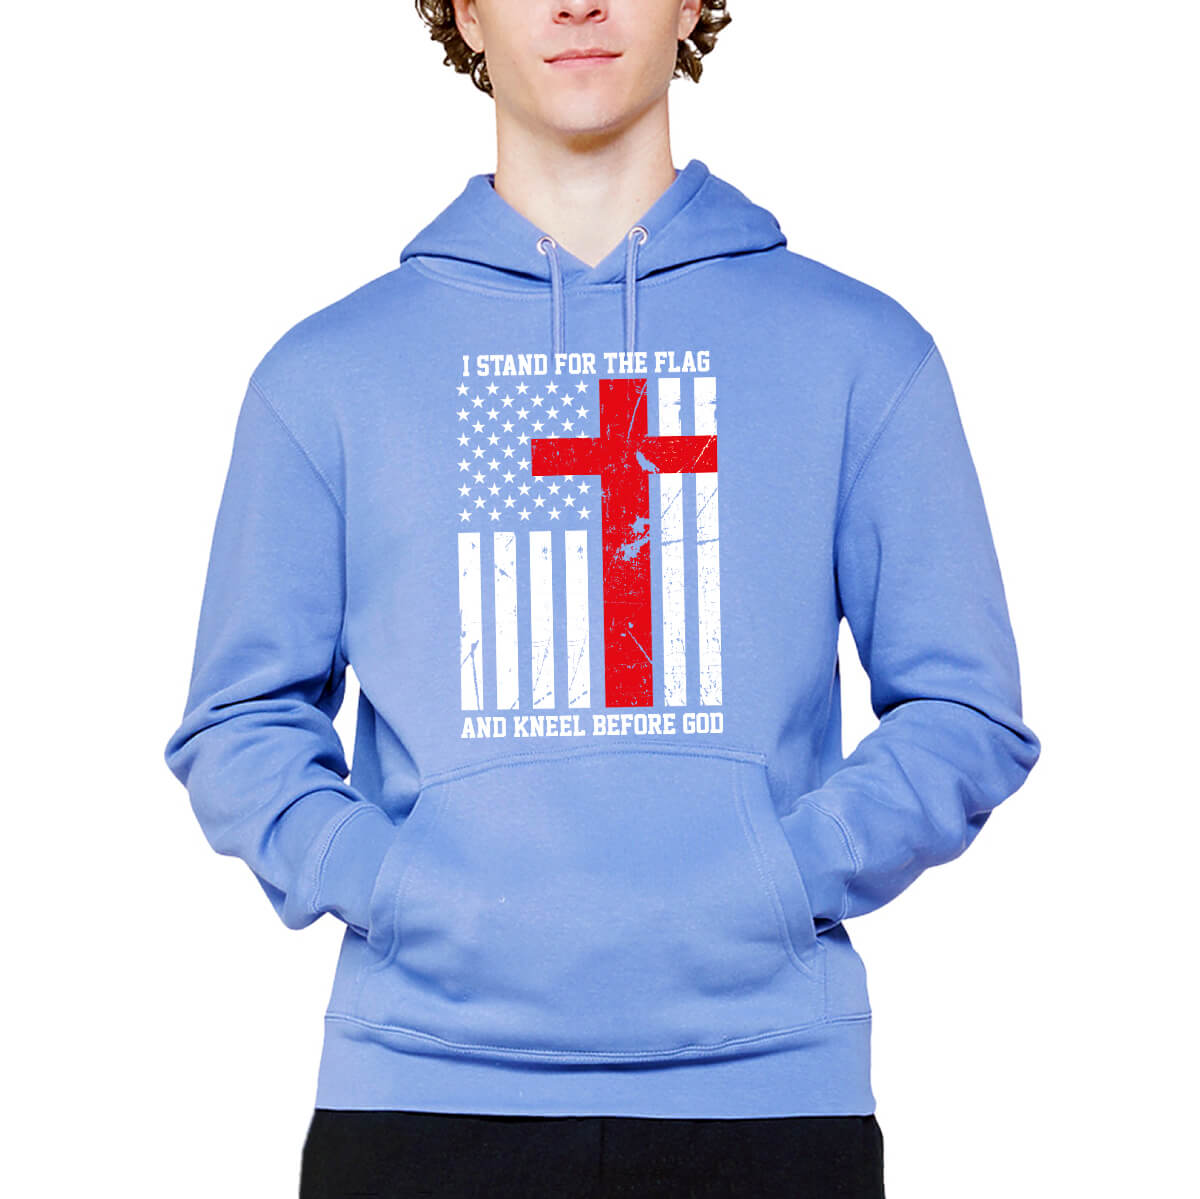 I Stand For The Flag And Kneel Before God Men's Sweatshirt Hoodie